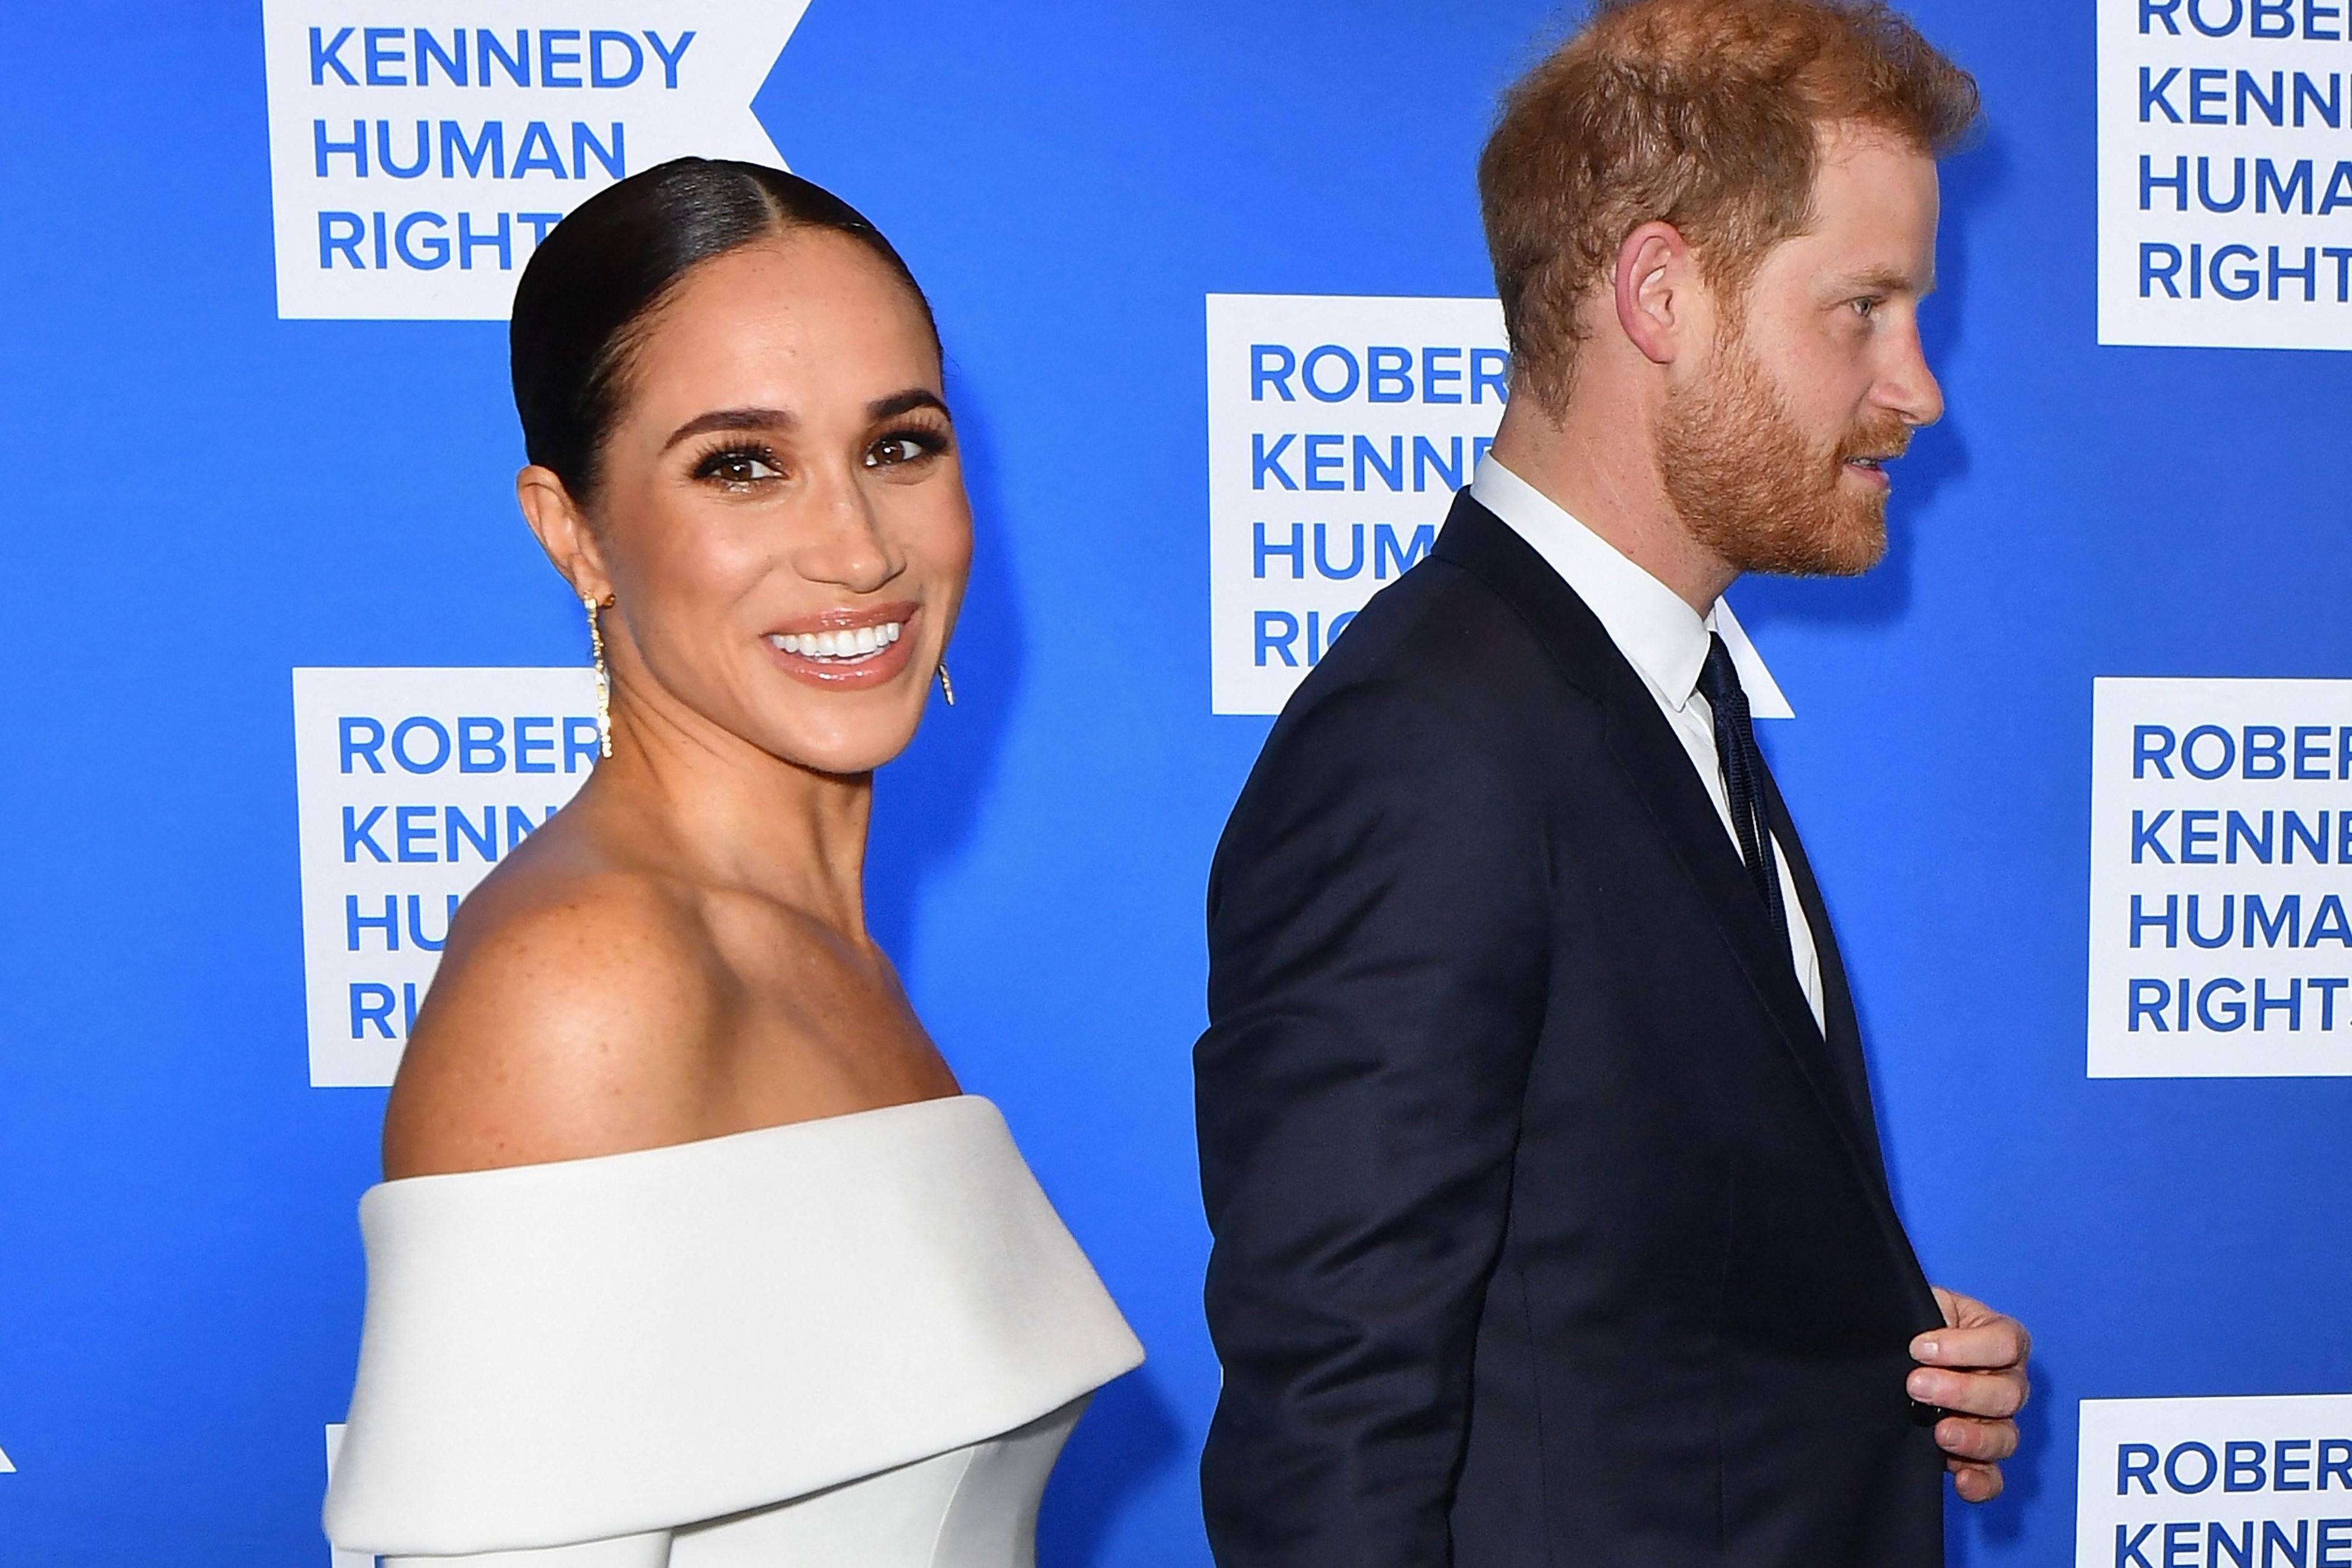 Harry and Meghan in front of a blue wall with logos for the Robert F. Kennedy Human Rights nonprofit.